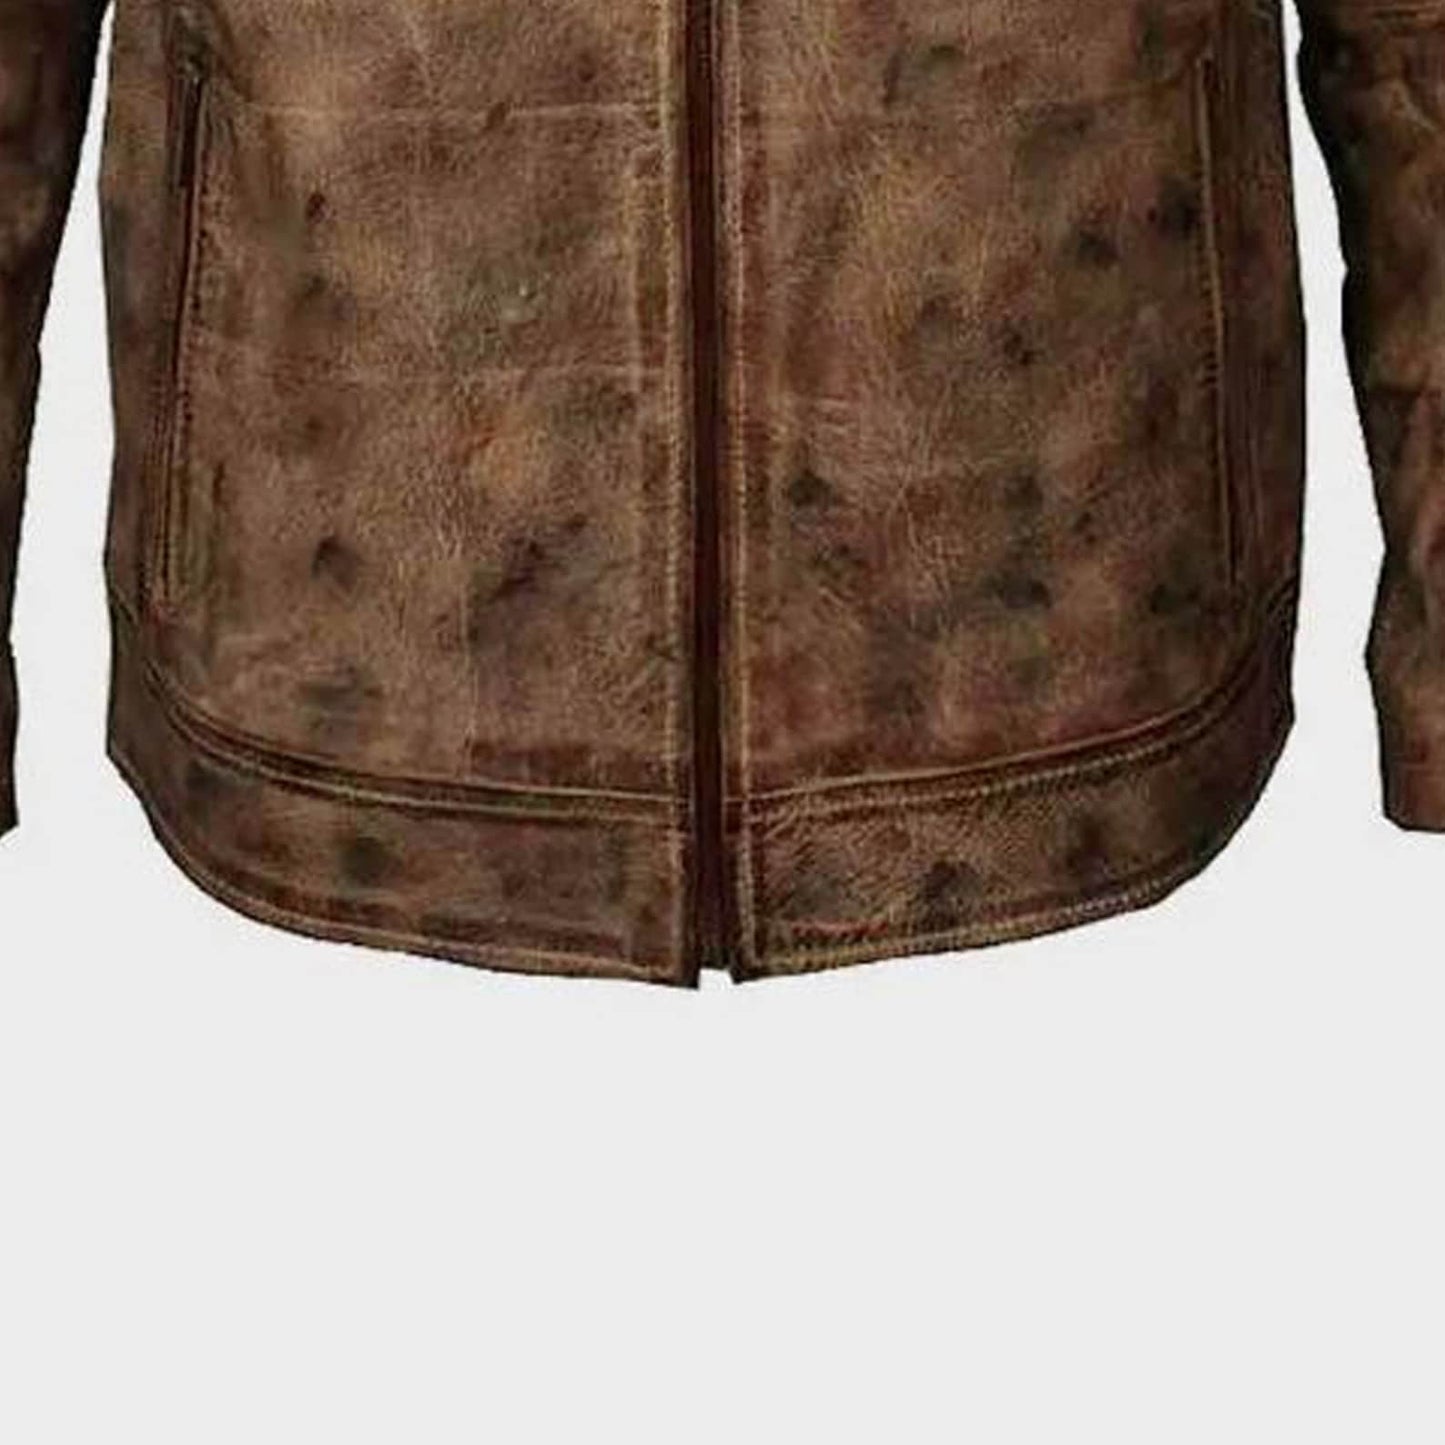 Brown Distressed Racer Leather Jacket